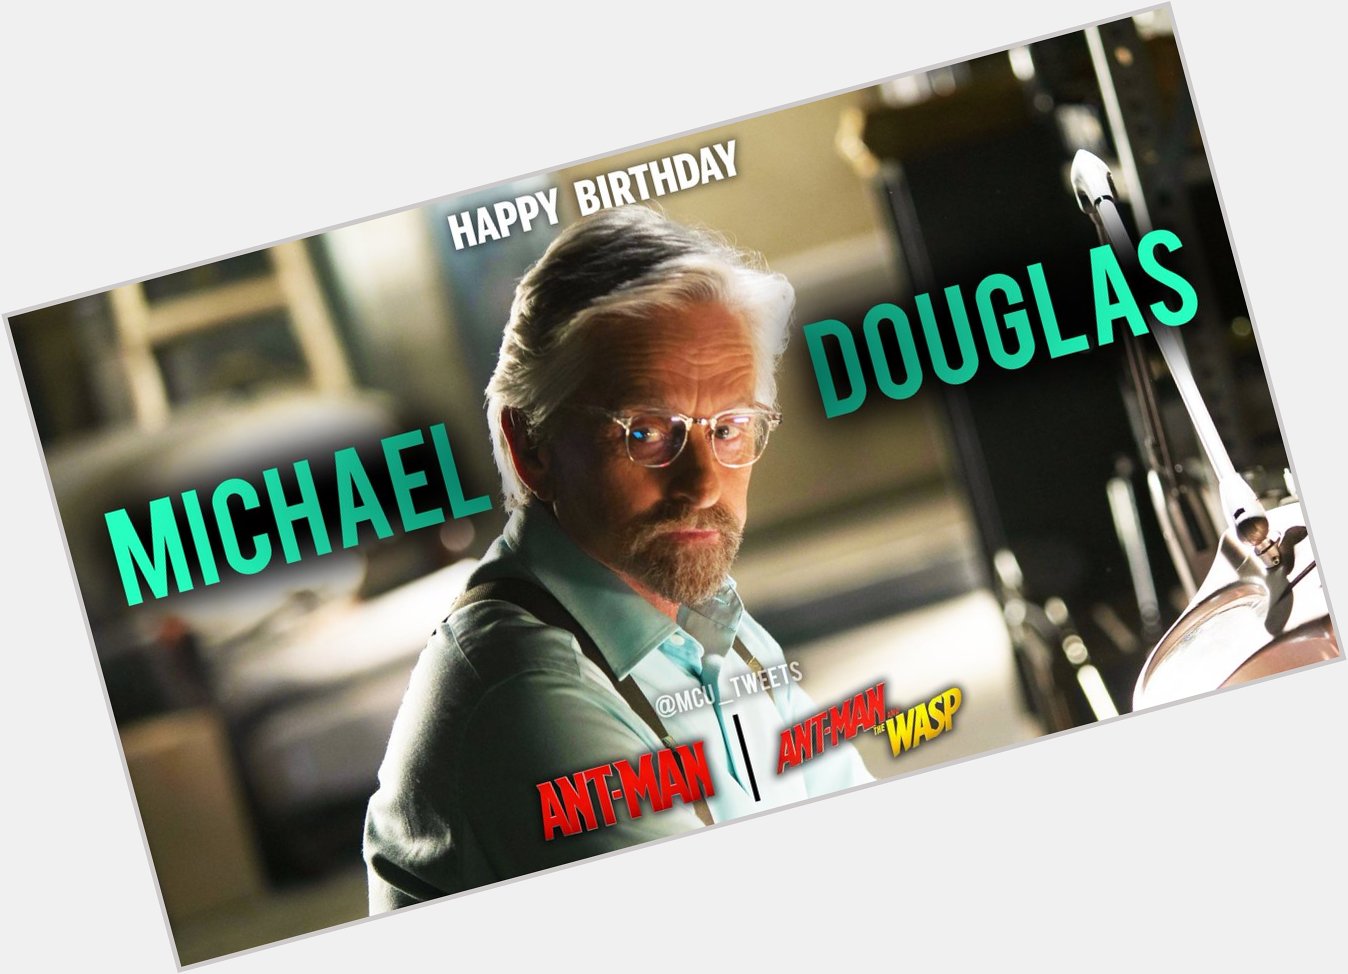 Wishing a very happy 73rd birthday to actor Michael Douglas, who plays Hank Pym in the ANT-MAN franchise! 